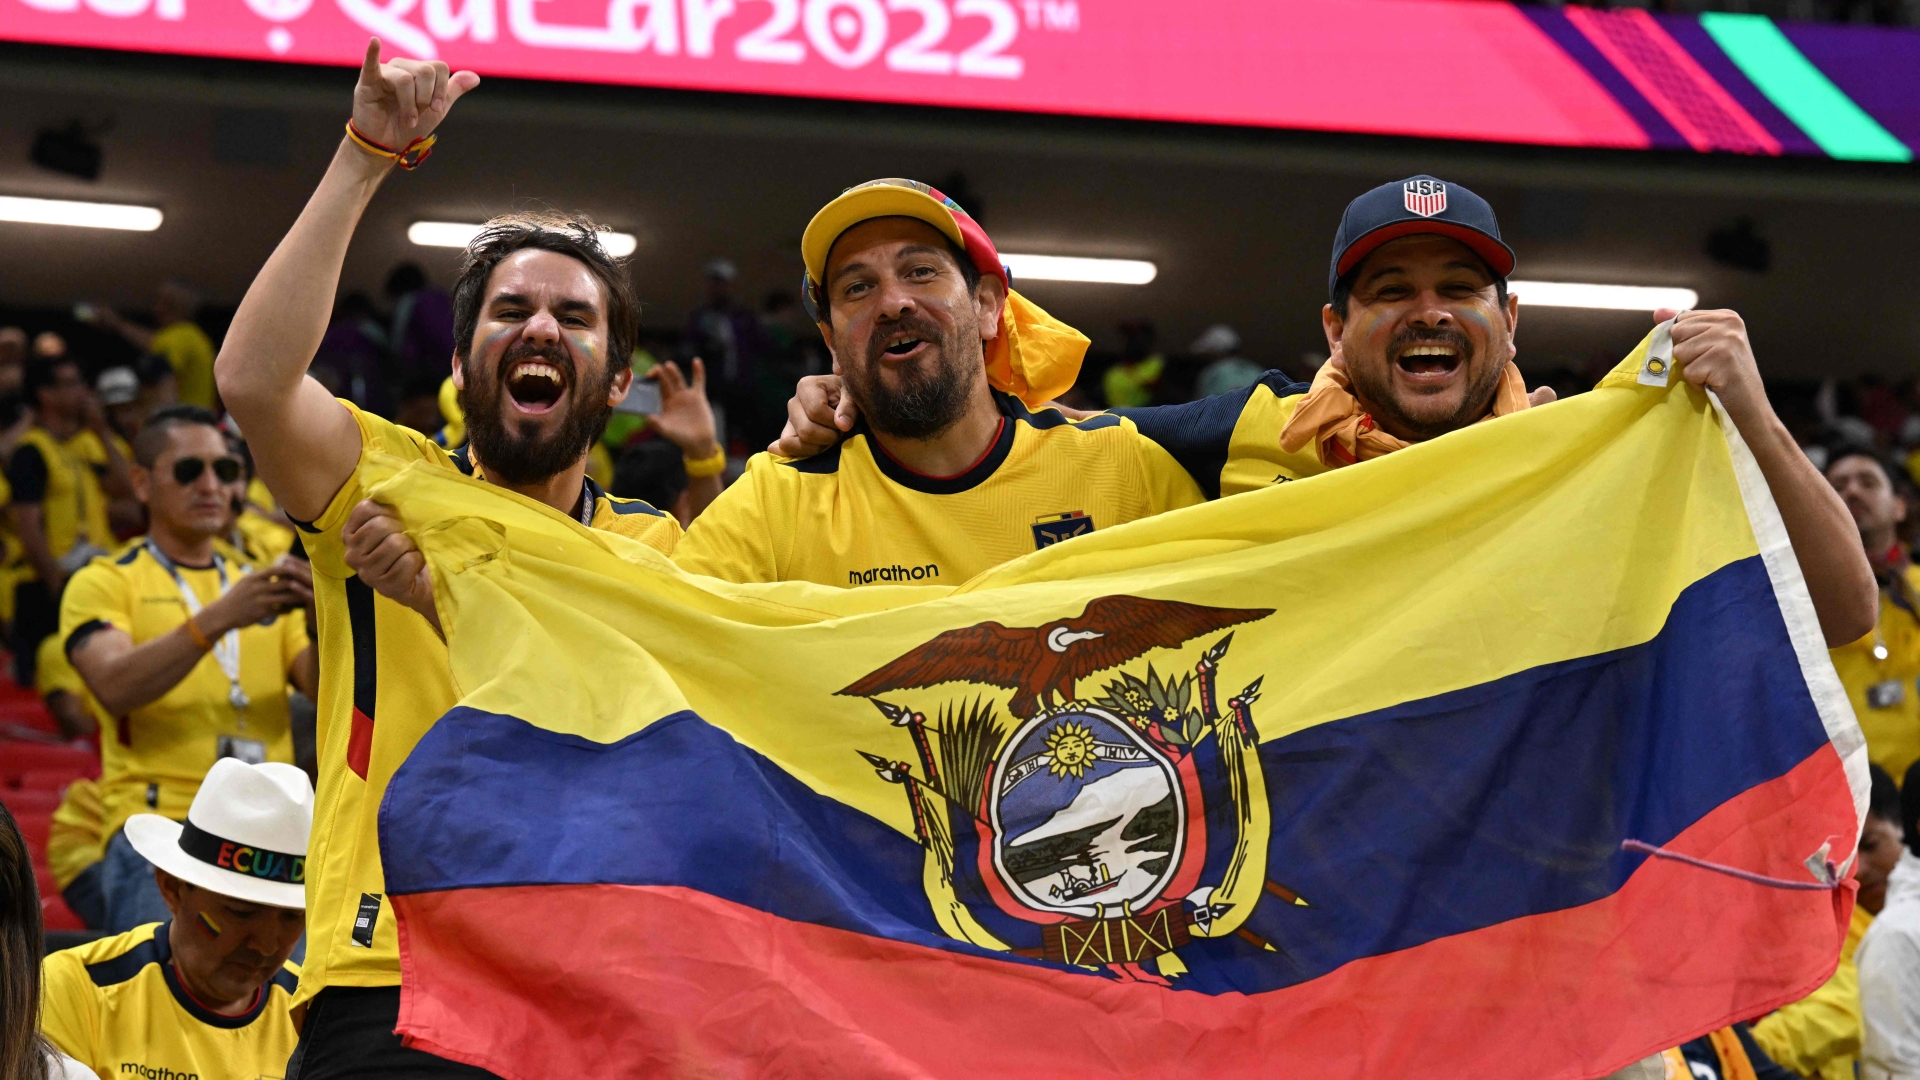 World Cup 2022 Opening Ceremony LIVE: Qatar Vs Ecuador, Kick-off Time, stream free, TV channel, teams, most recent